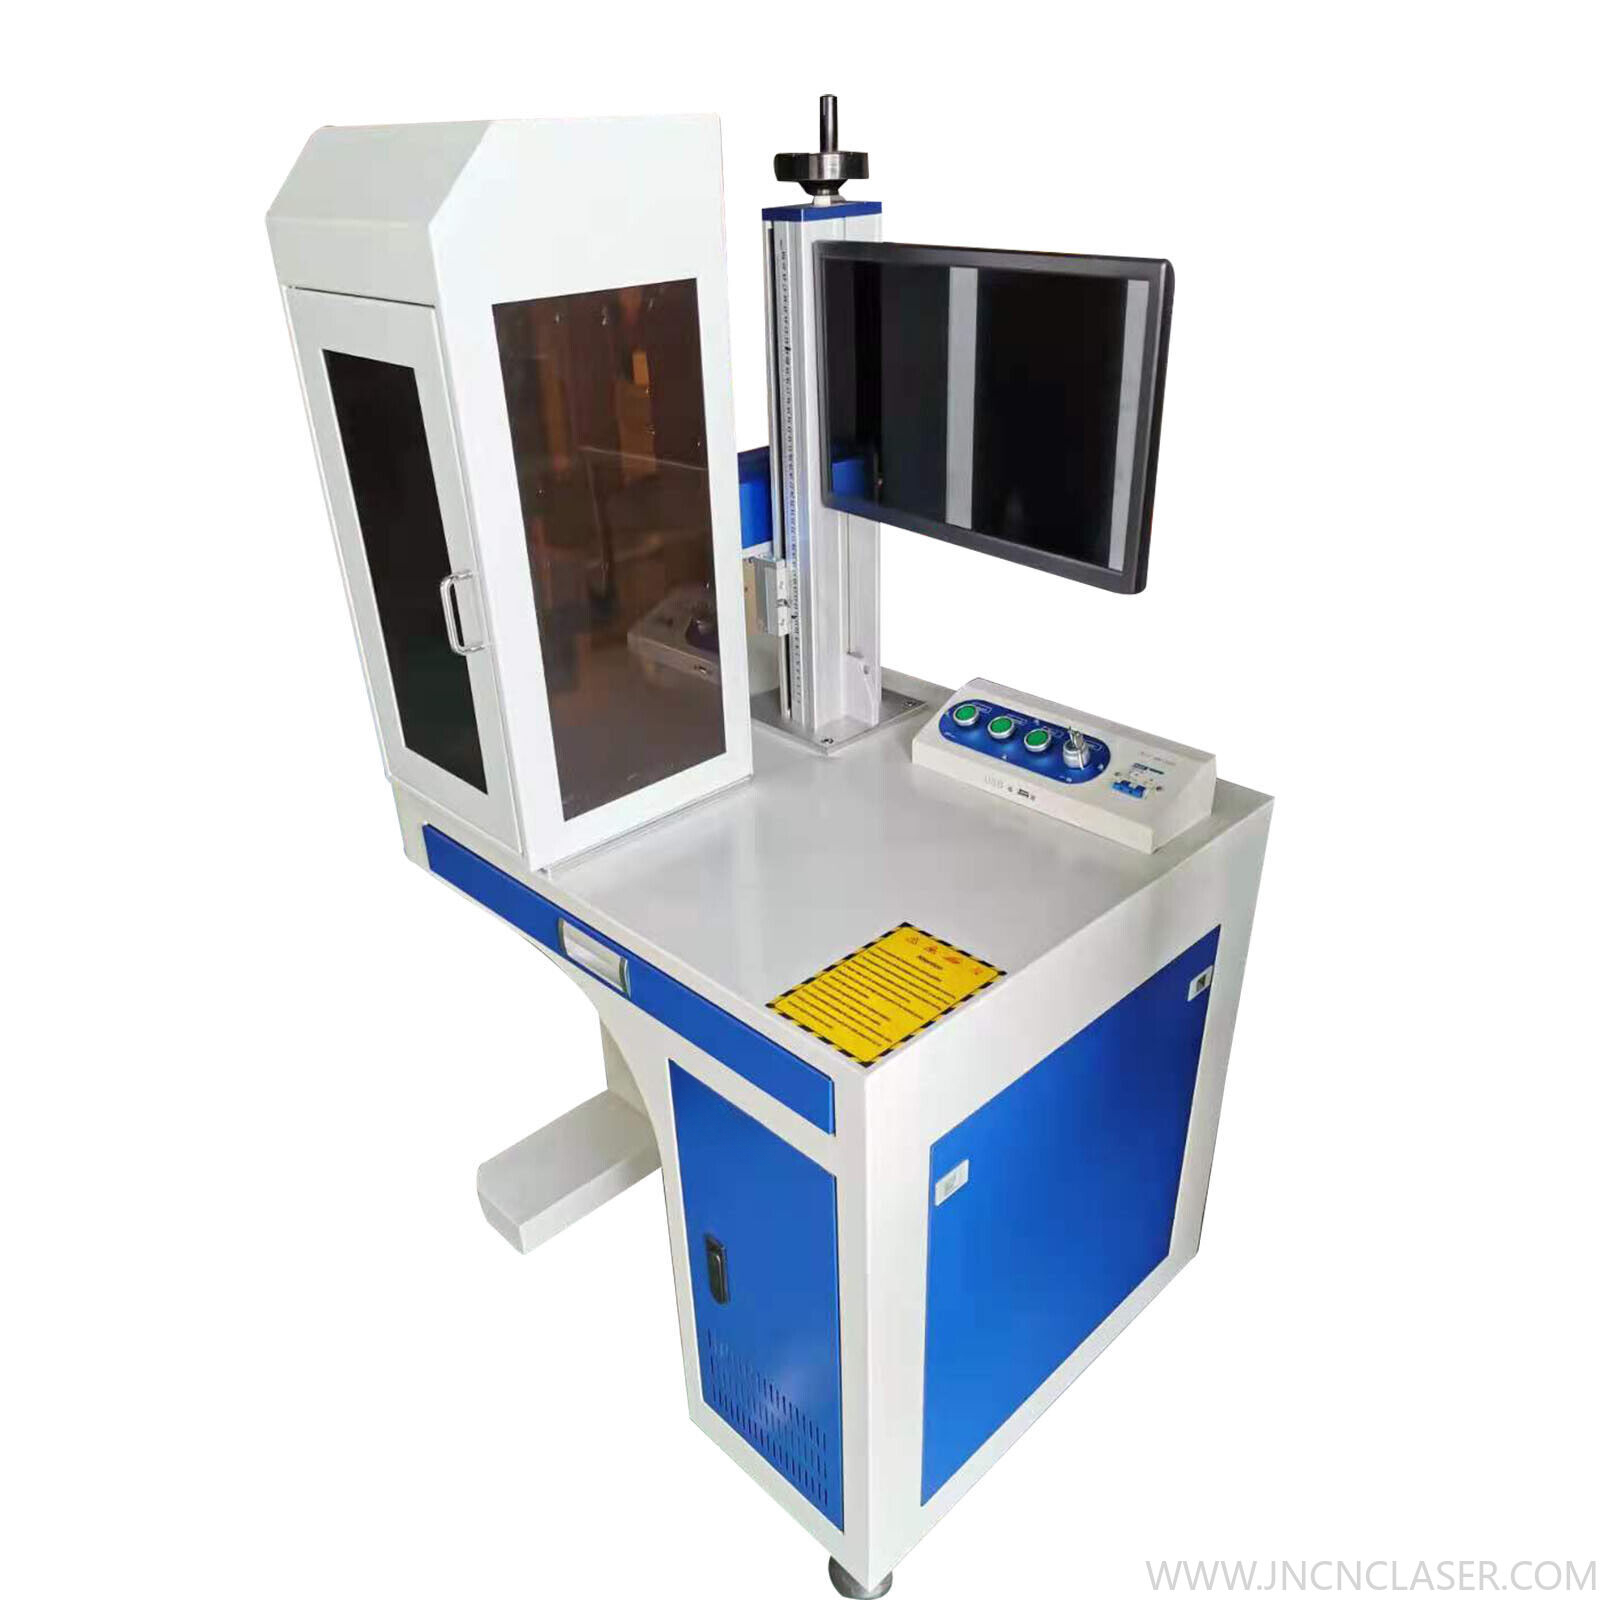 SMARTECH UV Laser Marking Machine with Cover